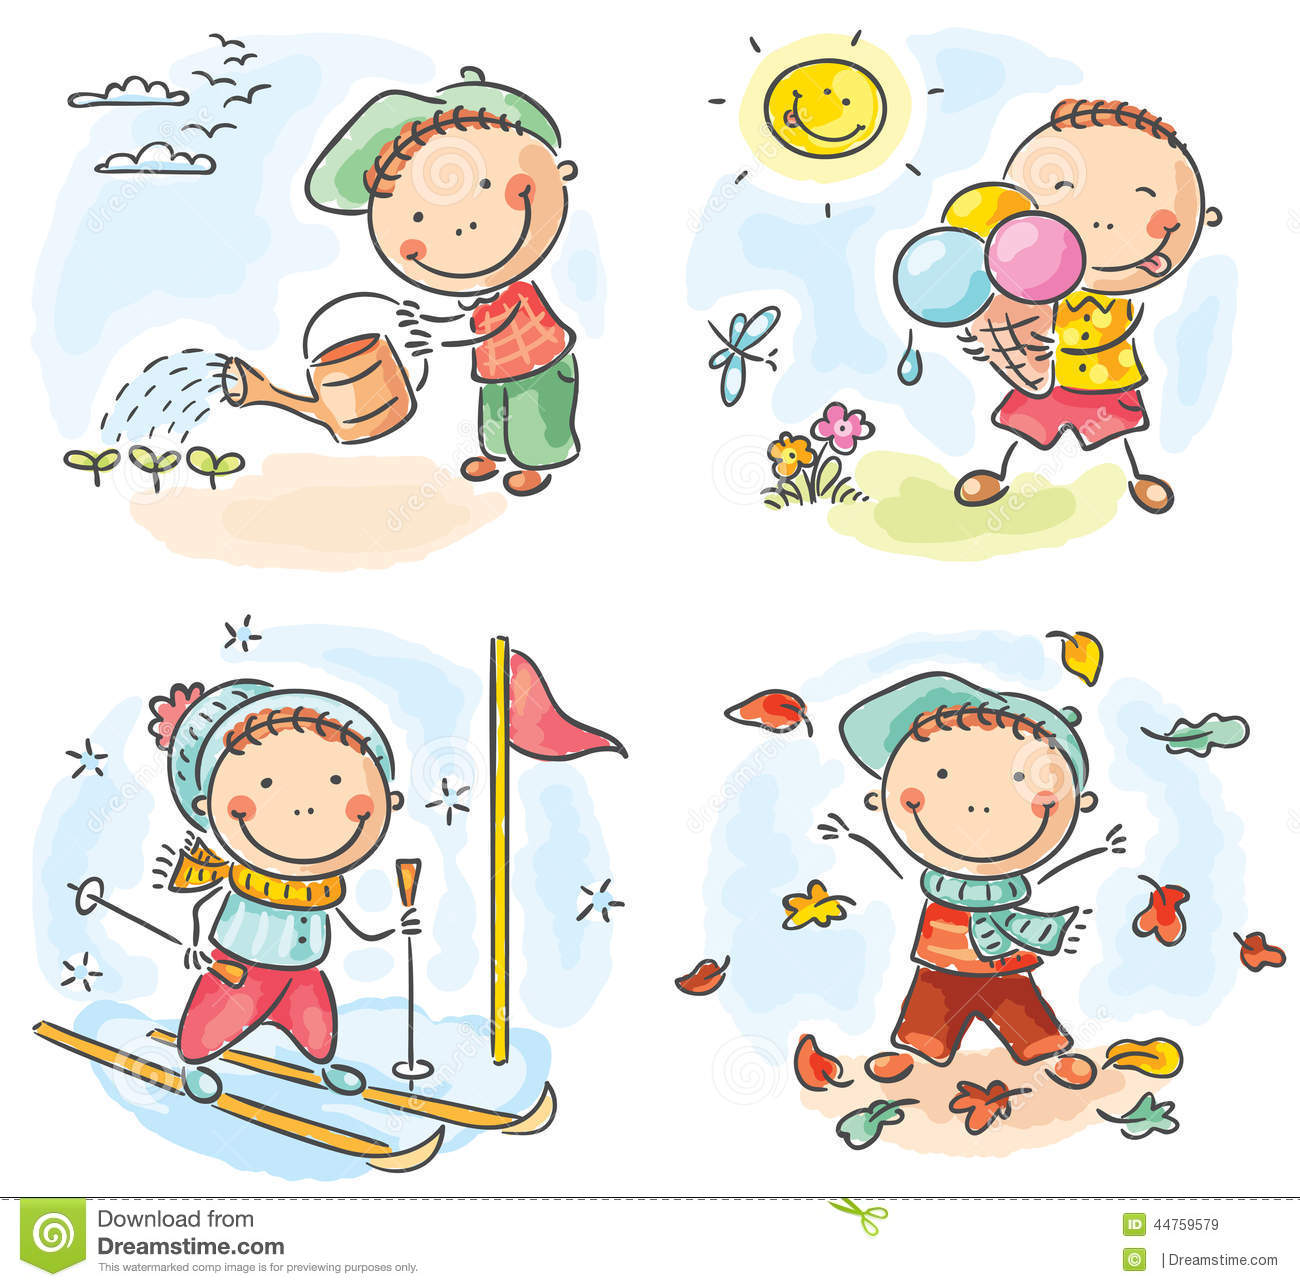     Activities During The Four Seasons Stock Vector   Image  44759579